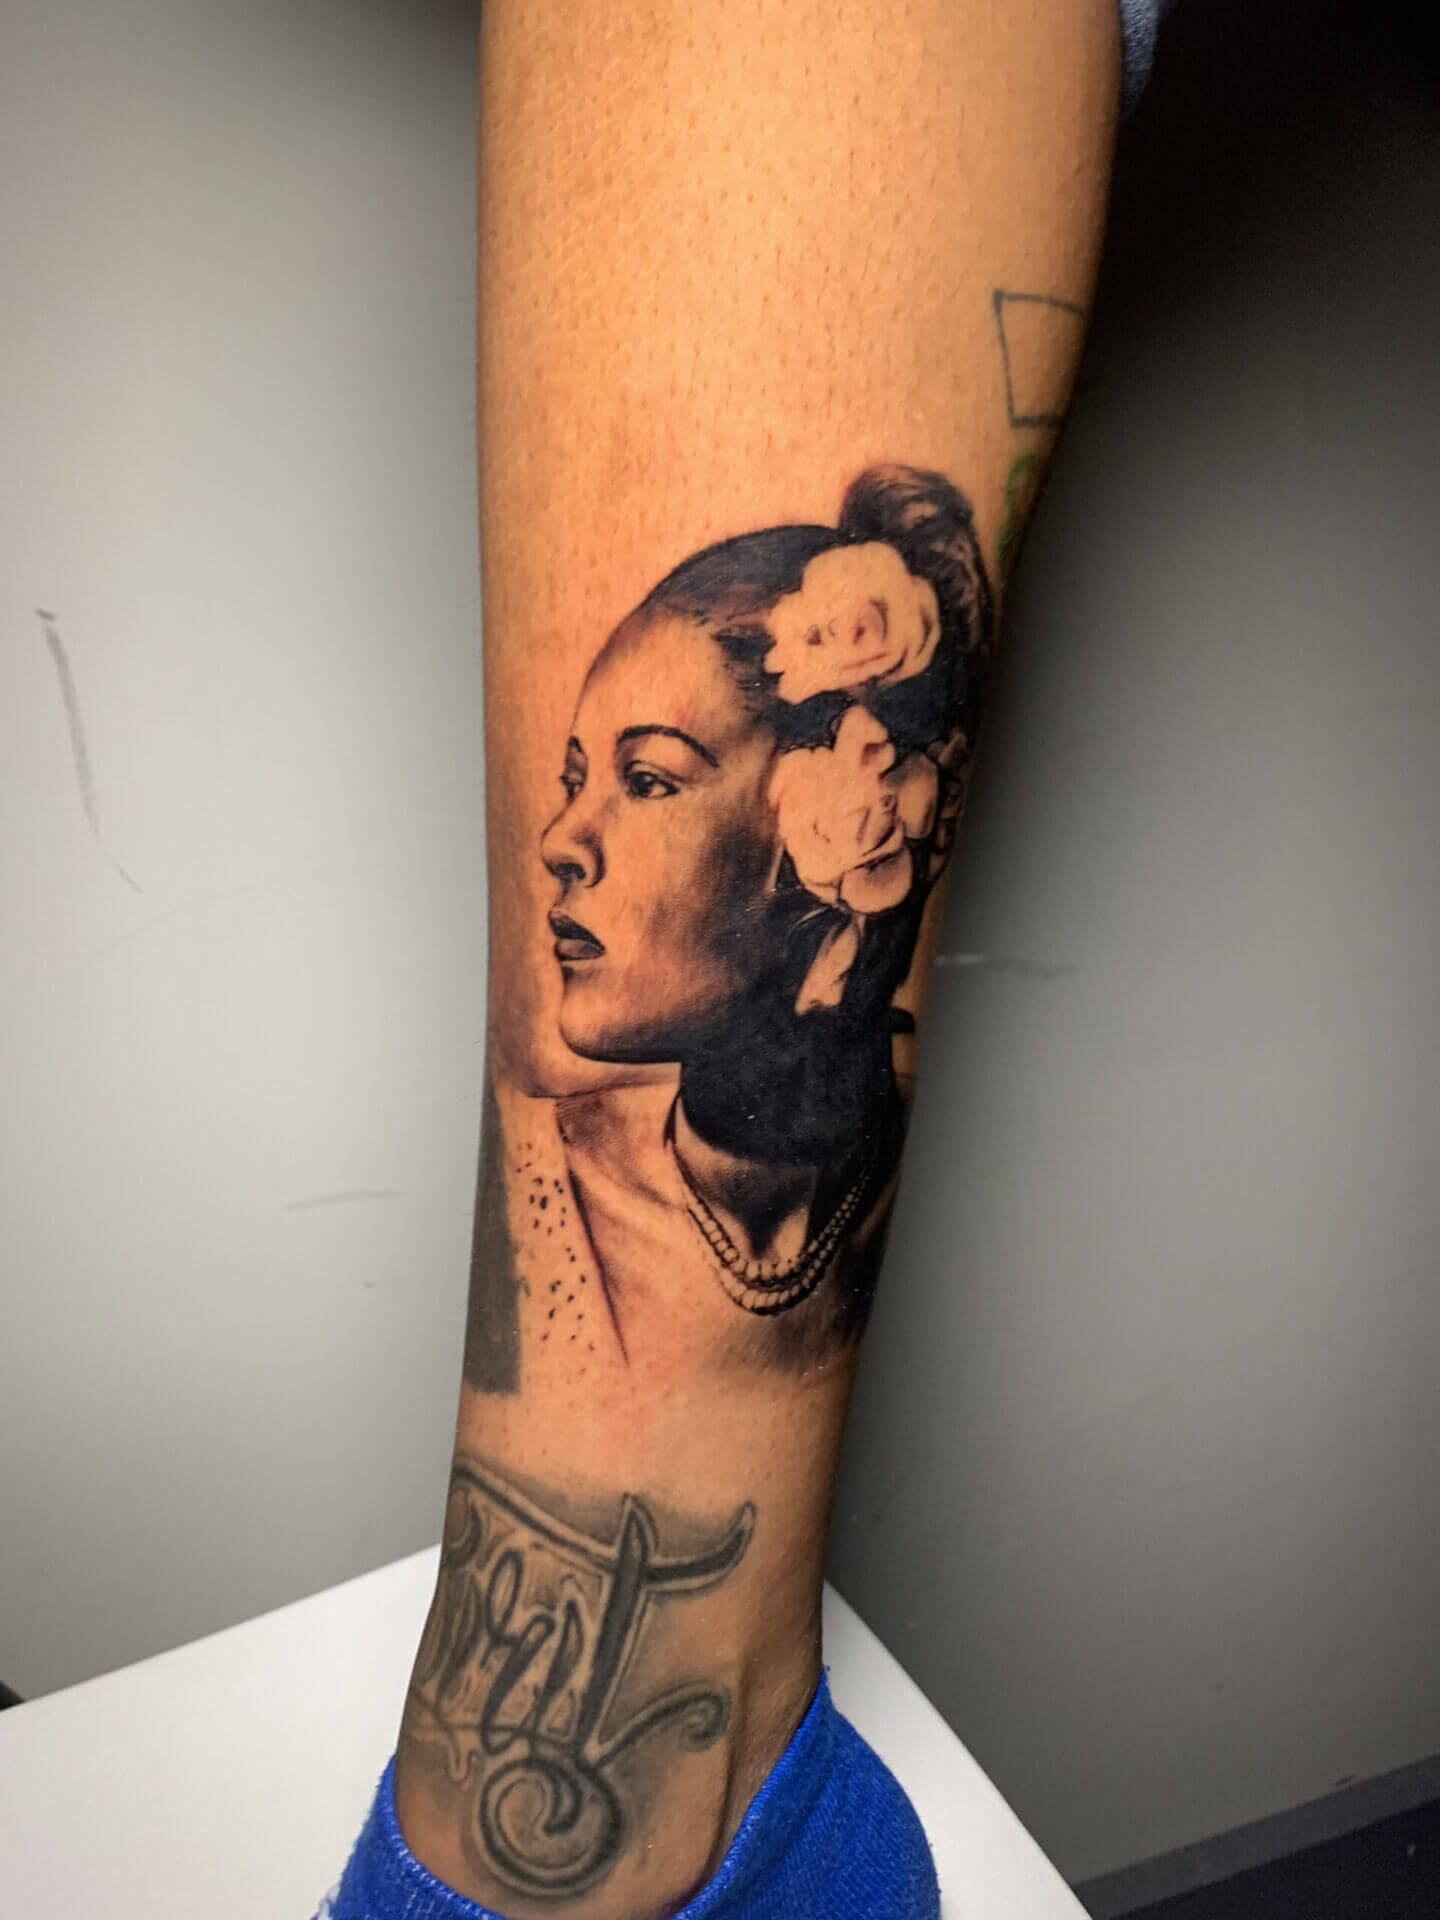 Portrait tattoo by J.R. Outlaw at Iron Palm Tattoos & Body Piercing In Atlanta, GA. Call 404-973-7828 or stop by for a free consultation. Iron Palm is in the castleberry district near Mercedes Benz stadium & Magic City.